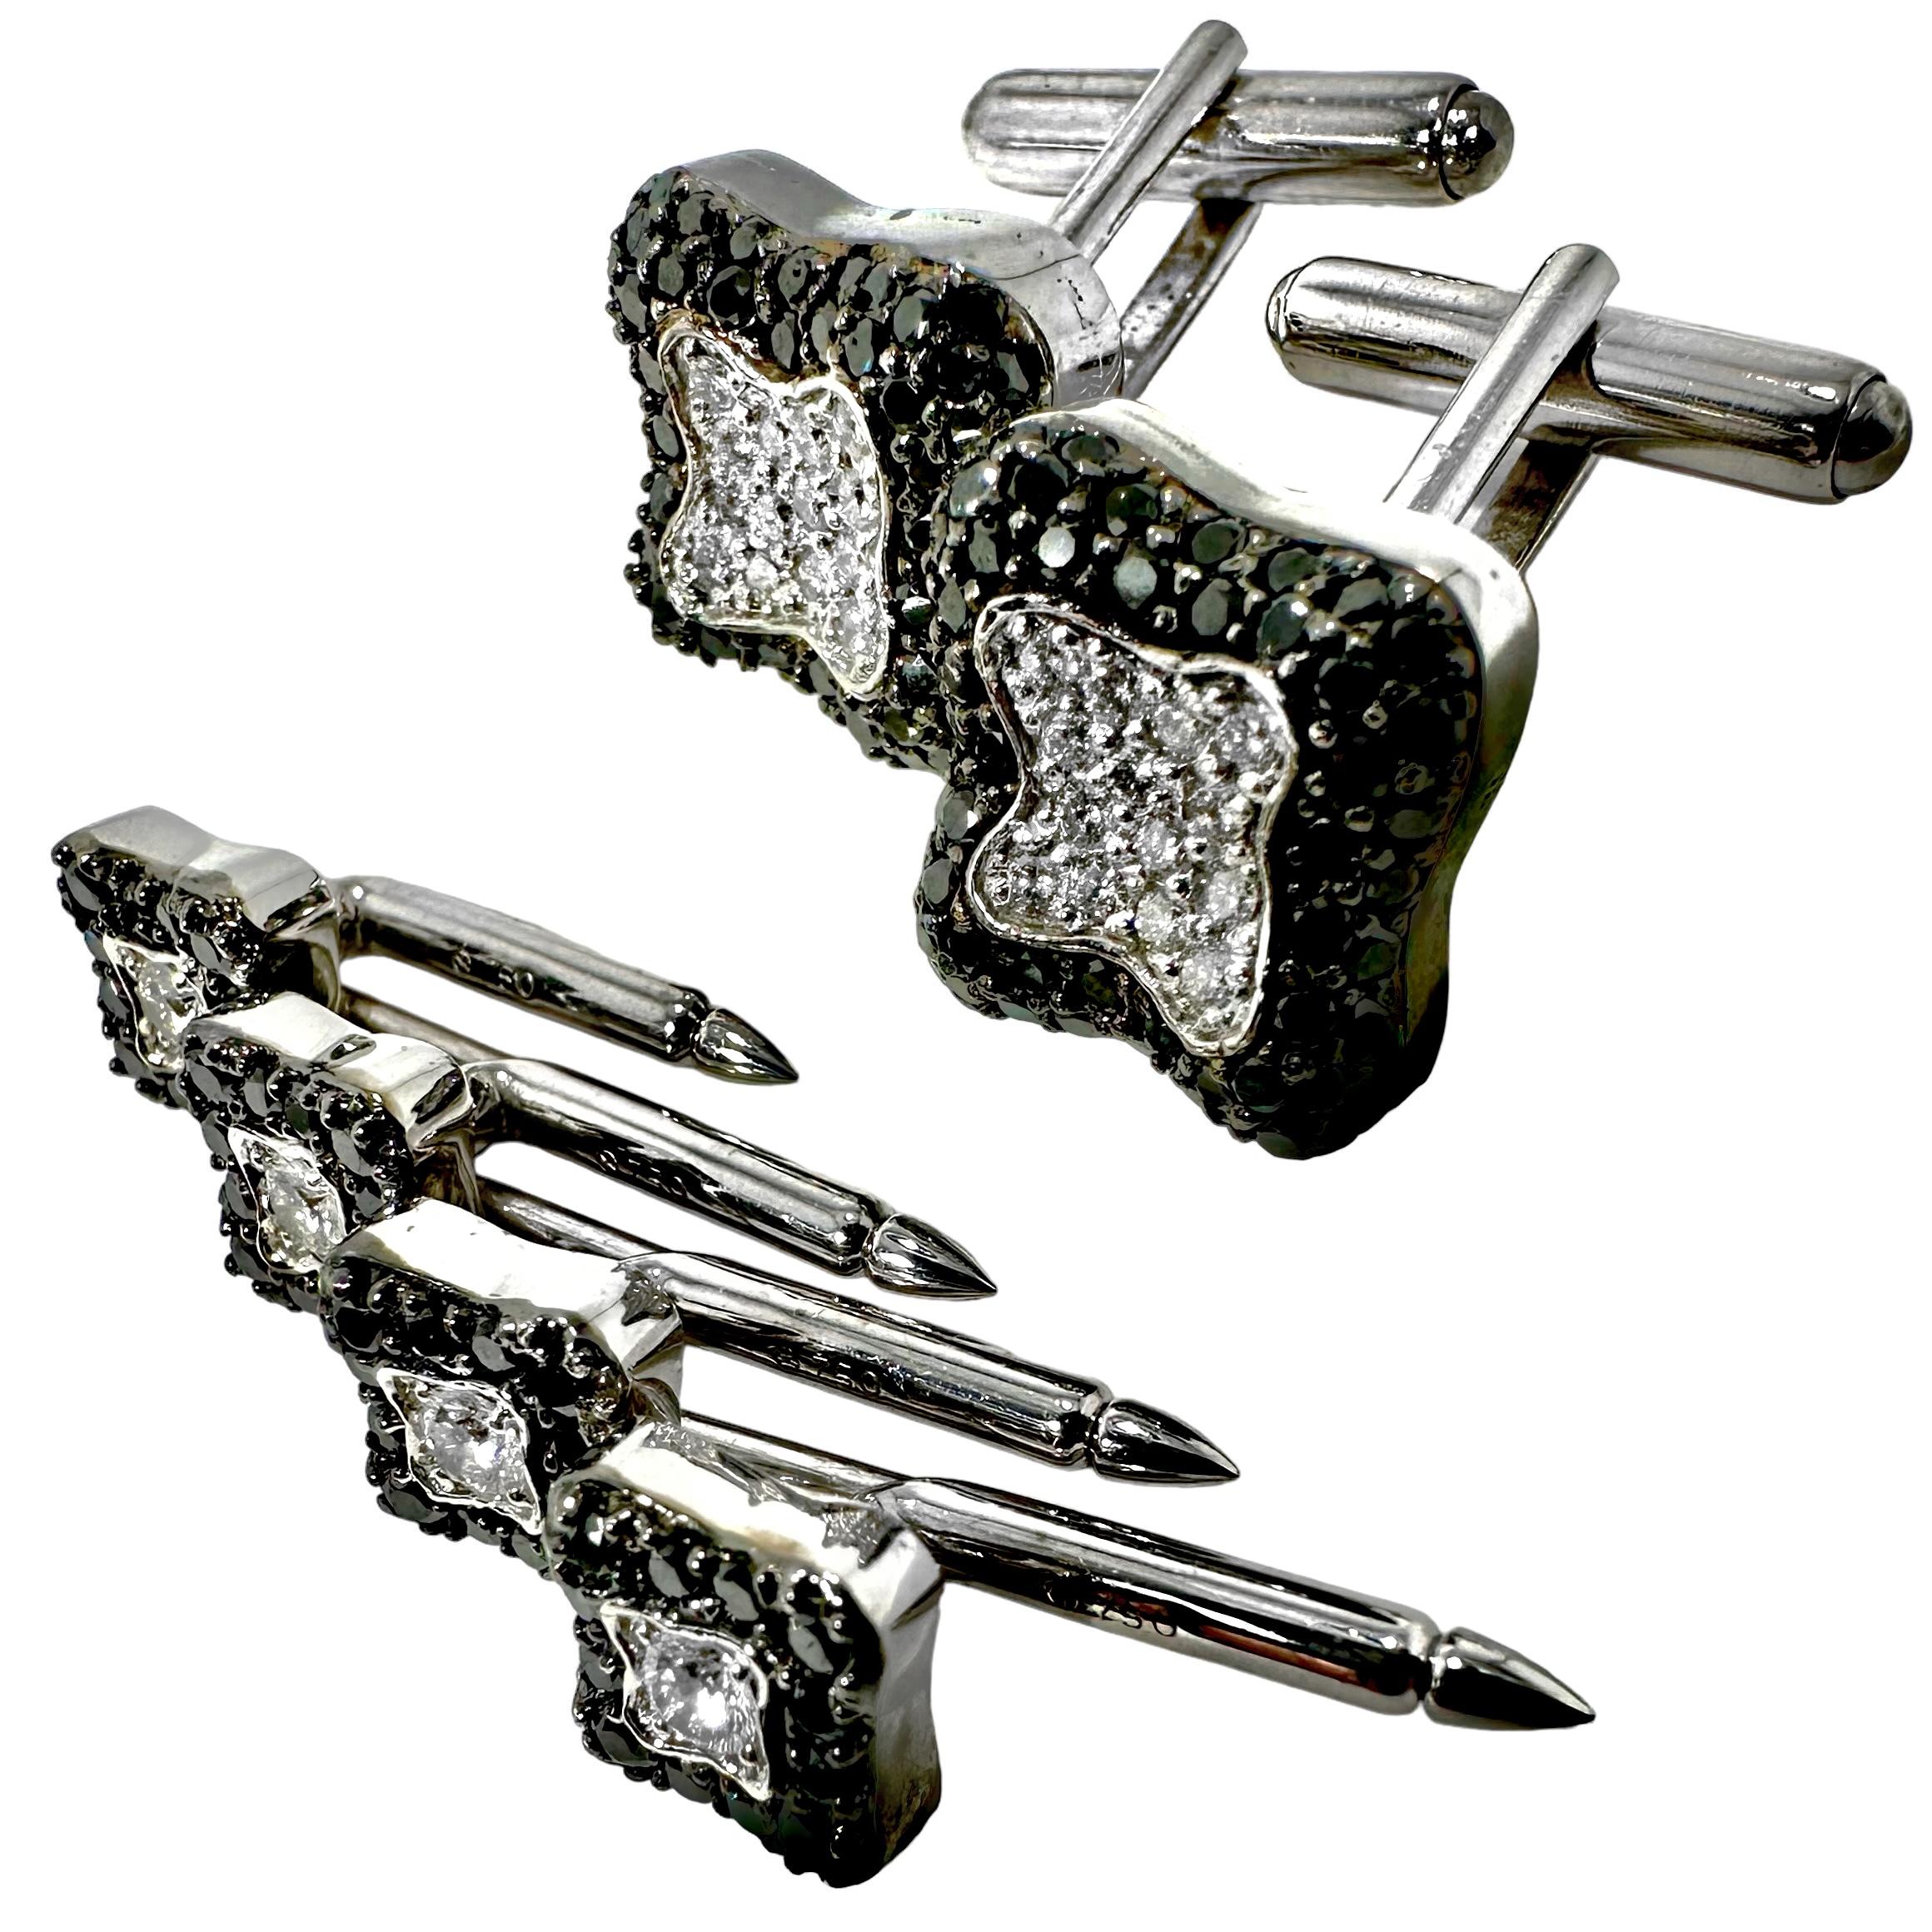 This artistically designed 18k white gold modern dress set by designer Mecan consists of cuff links with four matching stud buttons, generously set with brilliant cut white diamonds at the center surrounded by glistening black diamonds. The